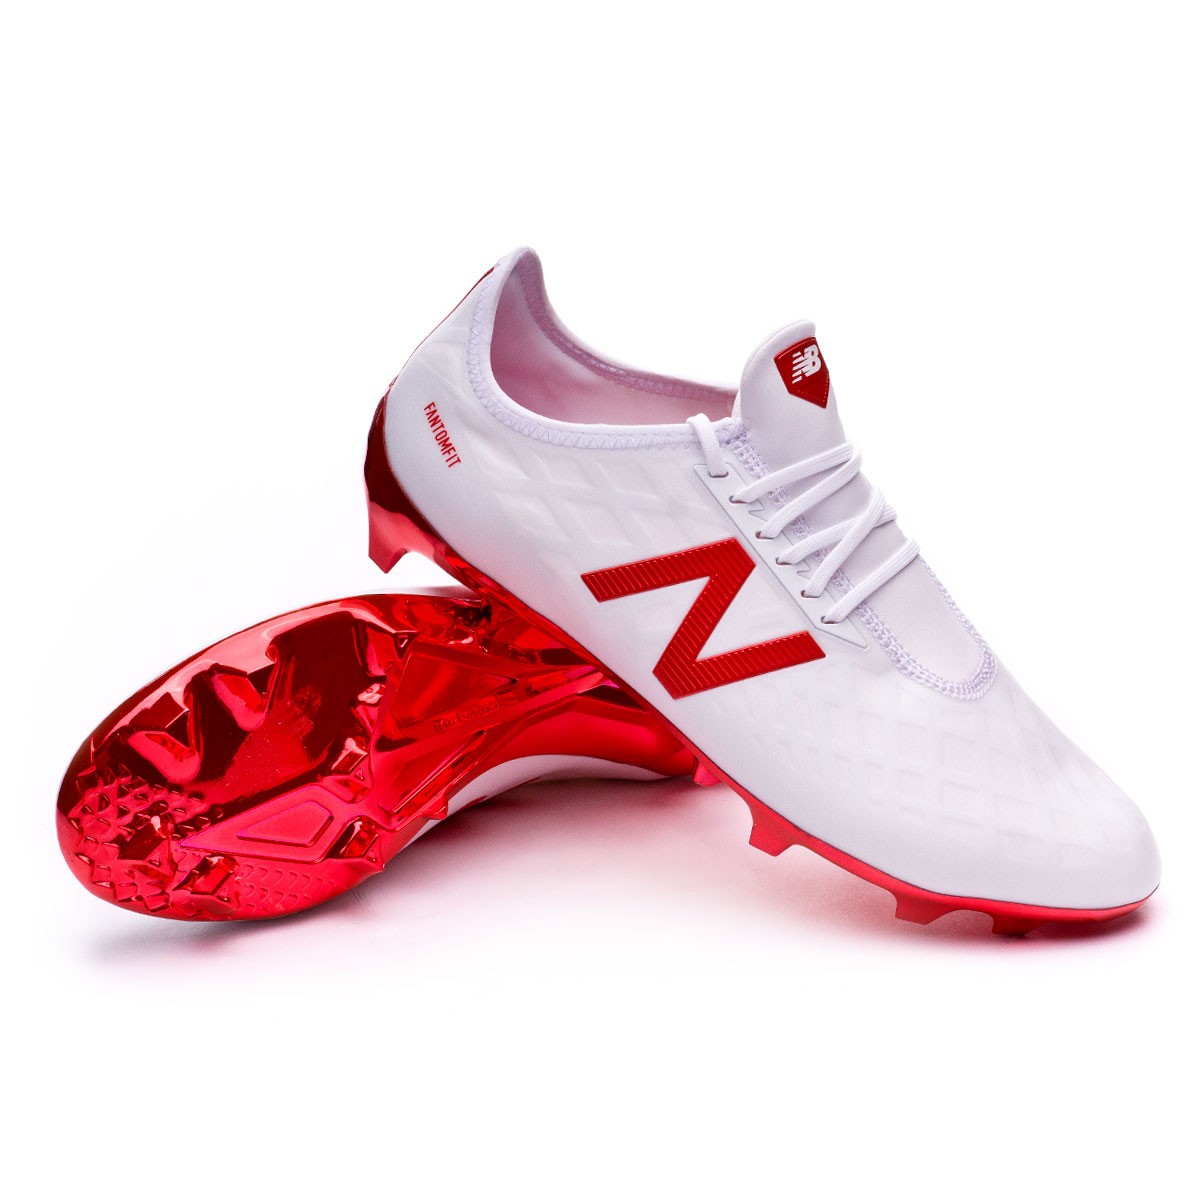 new balance football boots white,OFF 77 